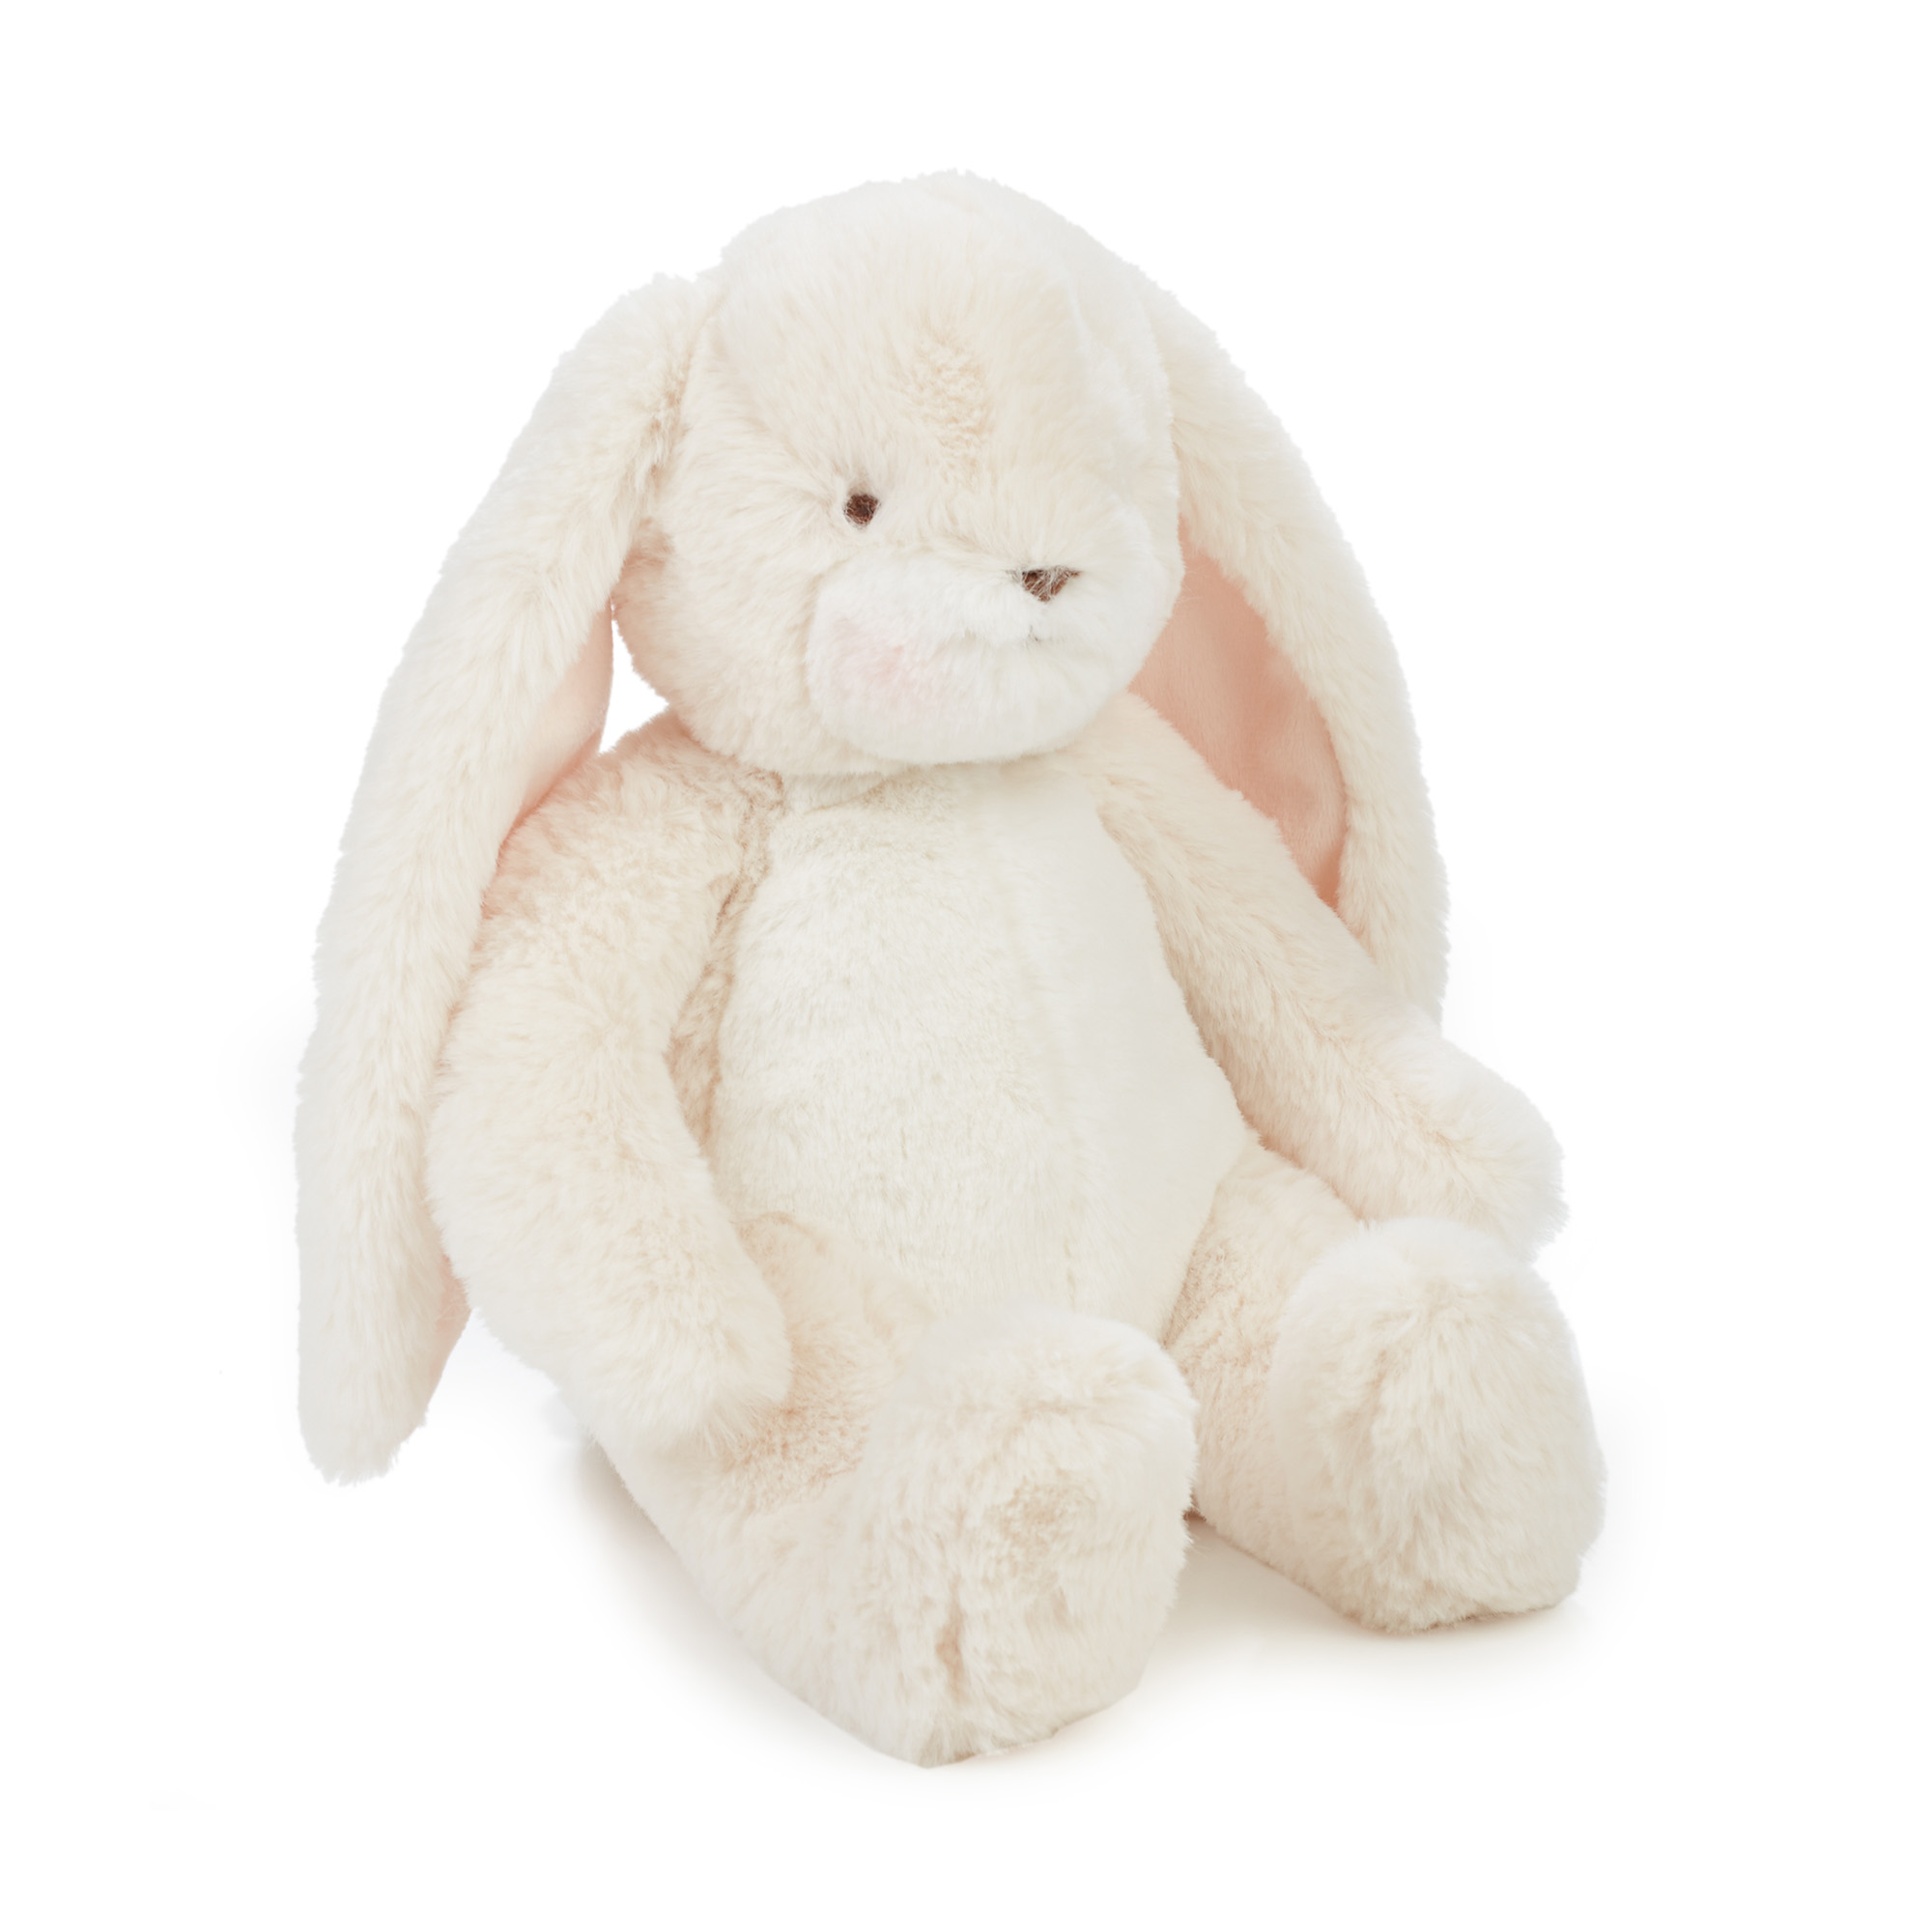 Peluche little nibble - cream bunny - Bunnies By The Bay